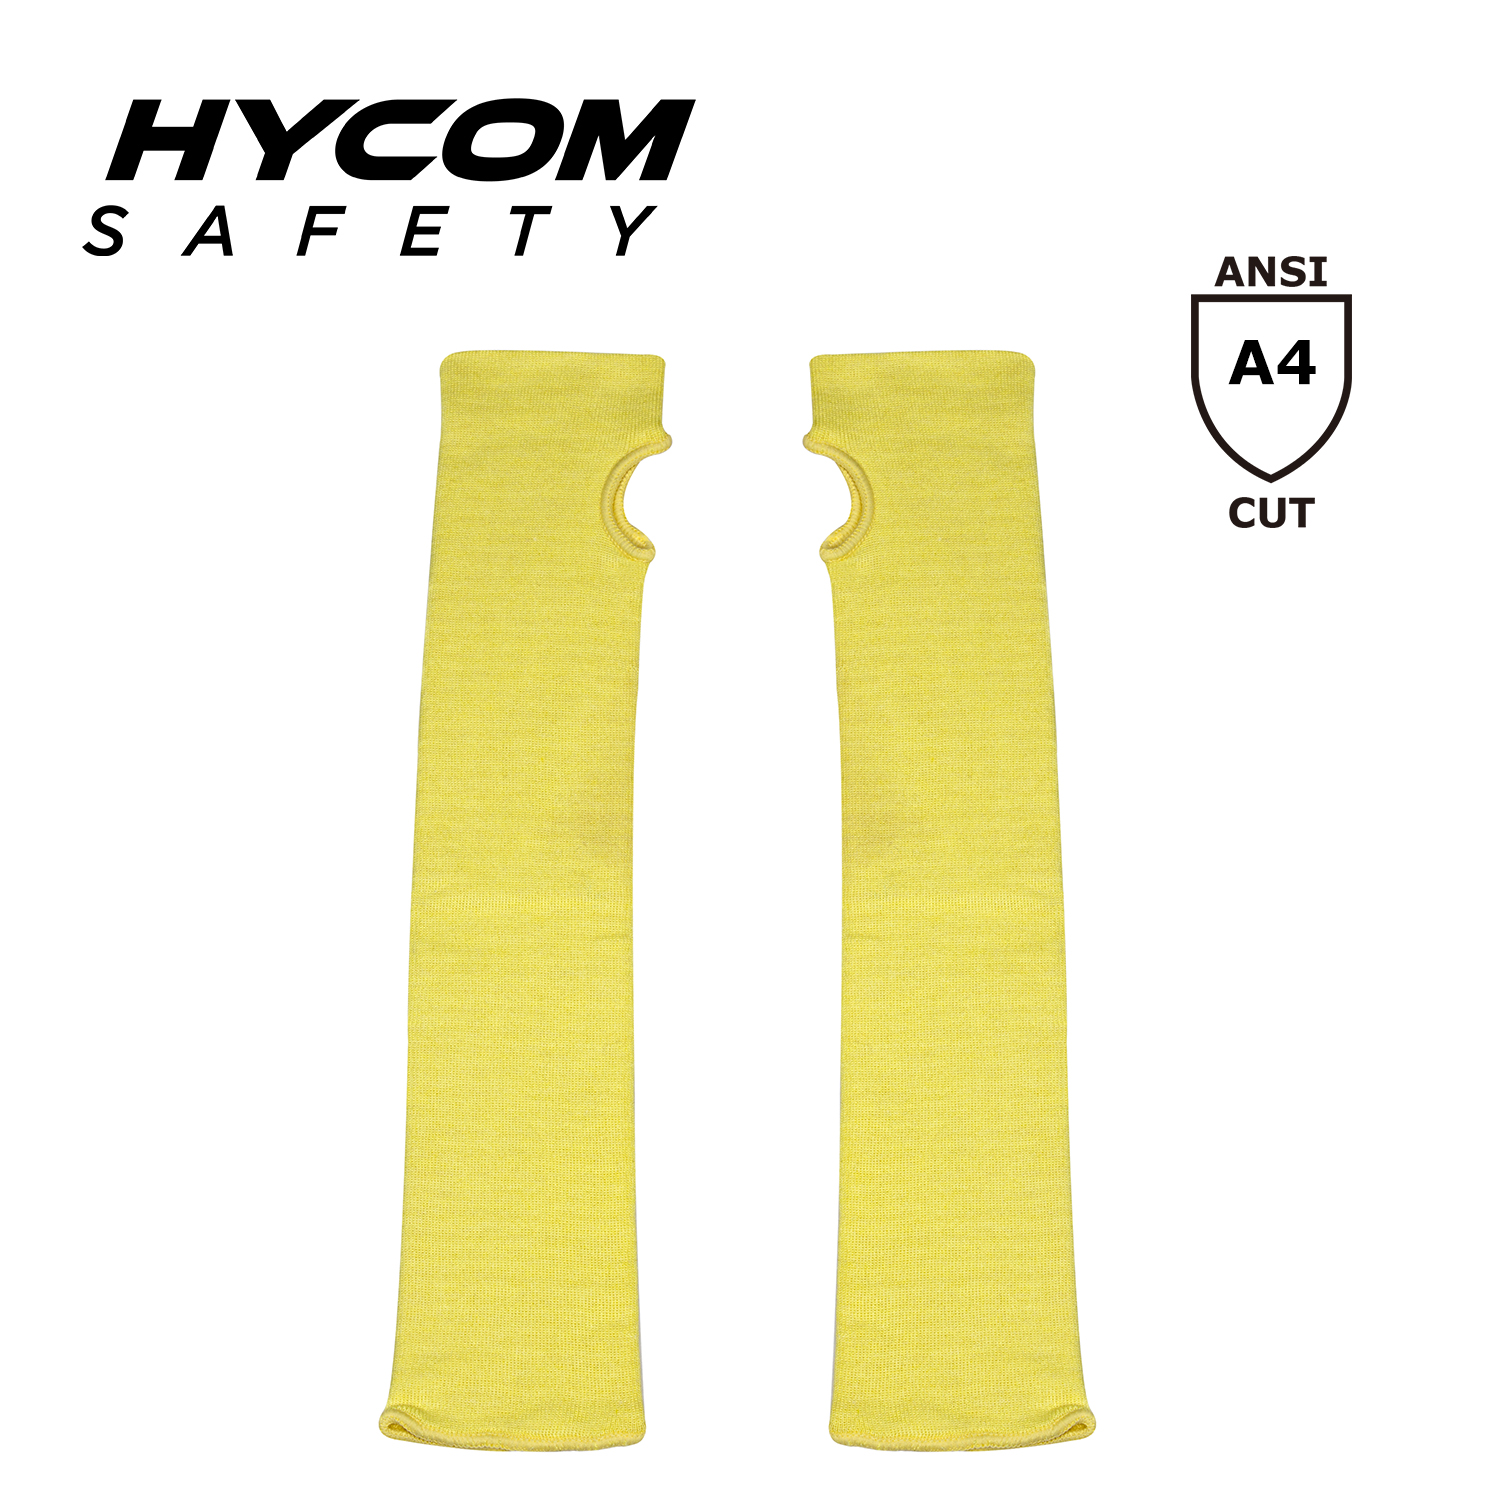 HYCOM Anti Cut Level D Cut Heat Resistant Sleeve Work Safety Sleeves with Thumb Slot